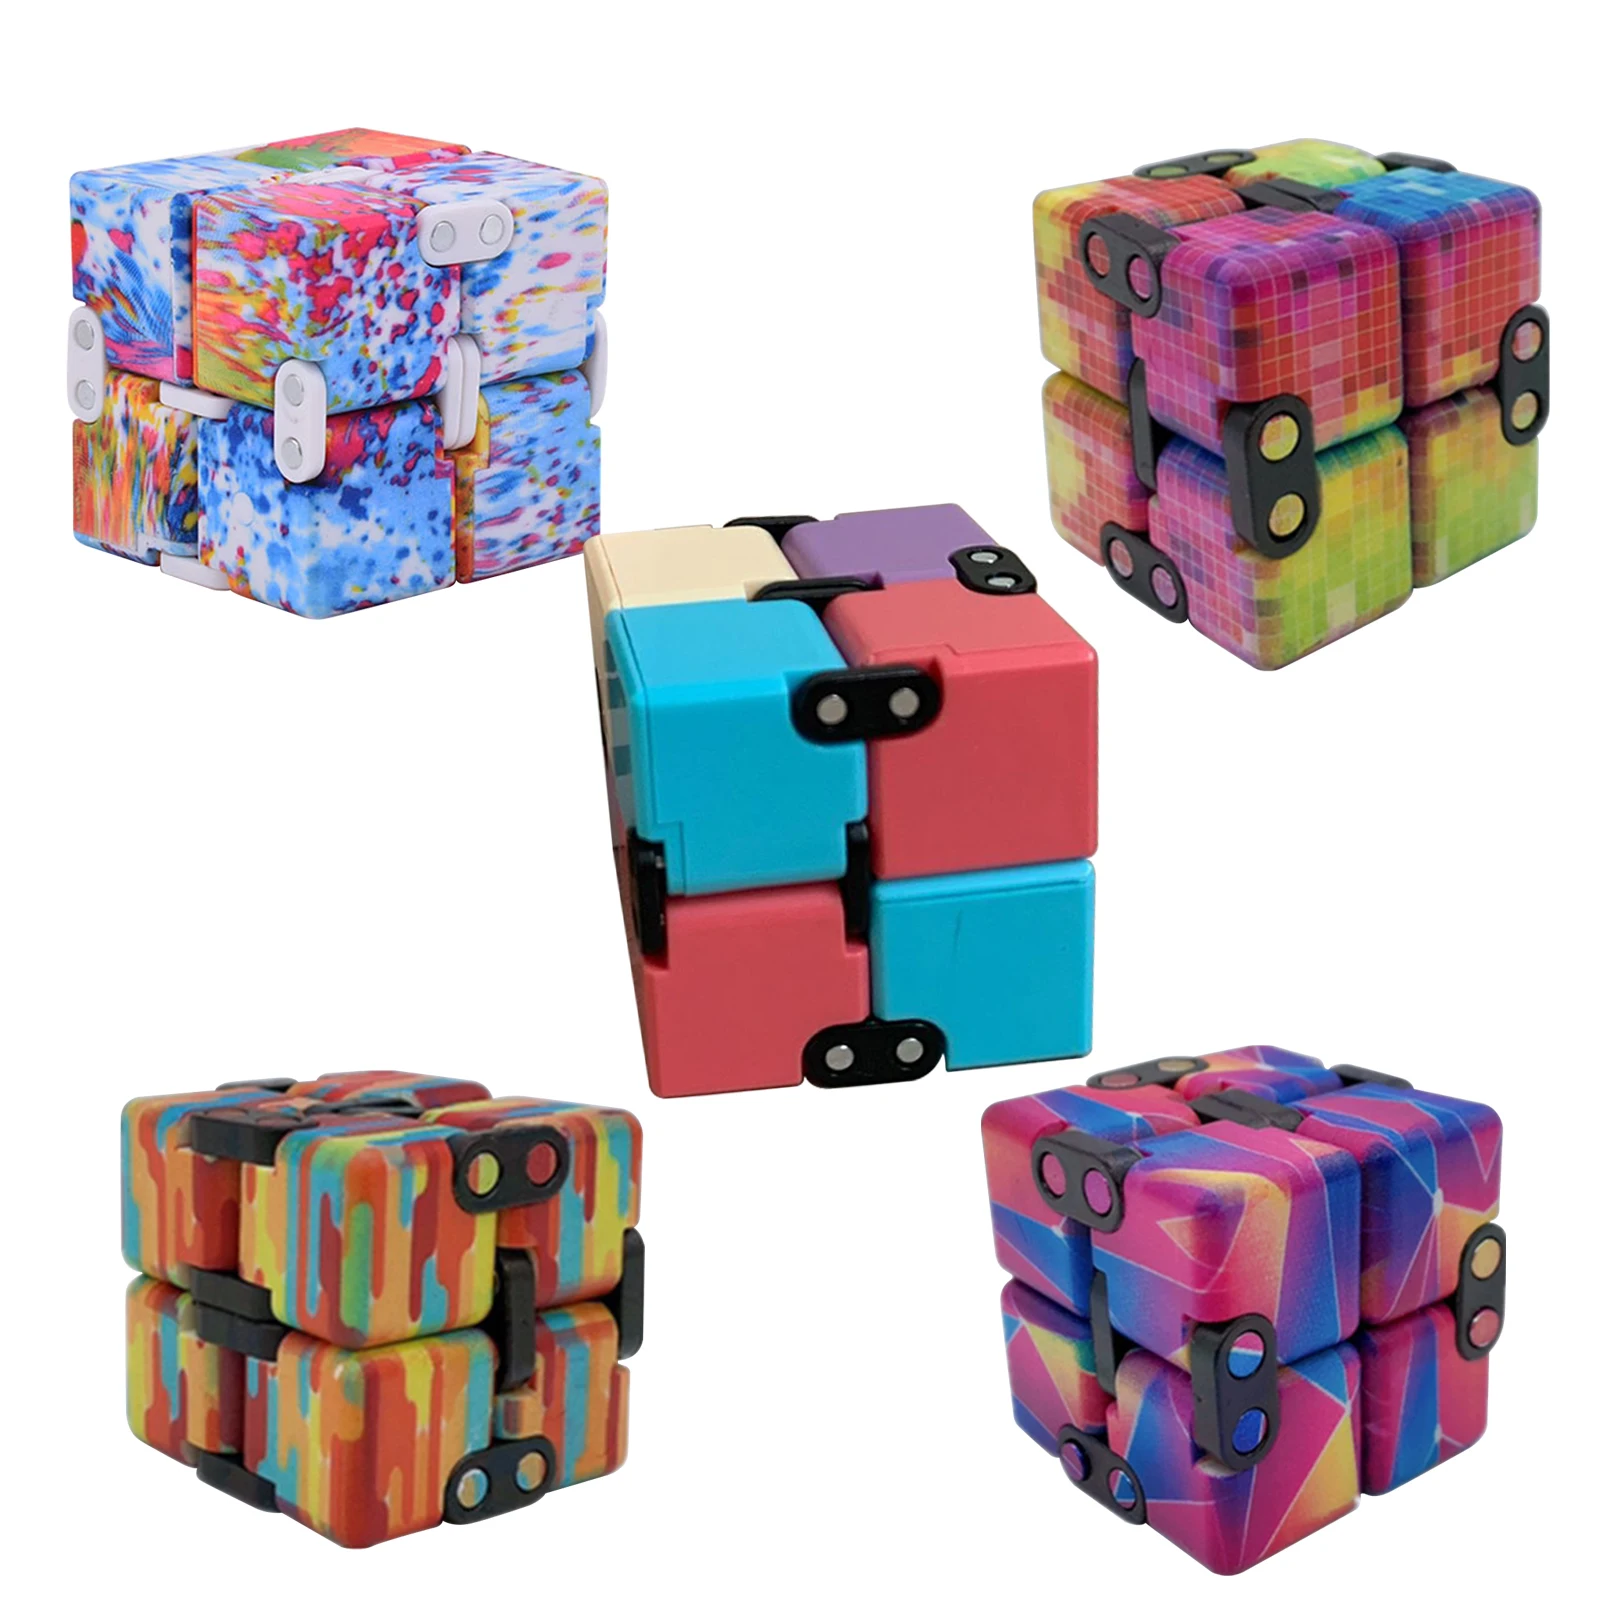 

2021 Antistress Infinite Cube Infinity Cube Magic Cube Office Flip Cubic Puzzle Stress Reliever Autism Toys Relax Toy For Adults